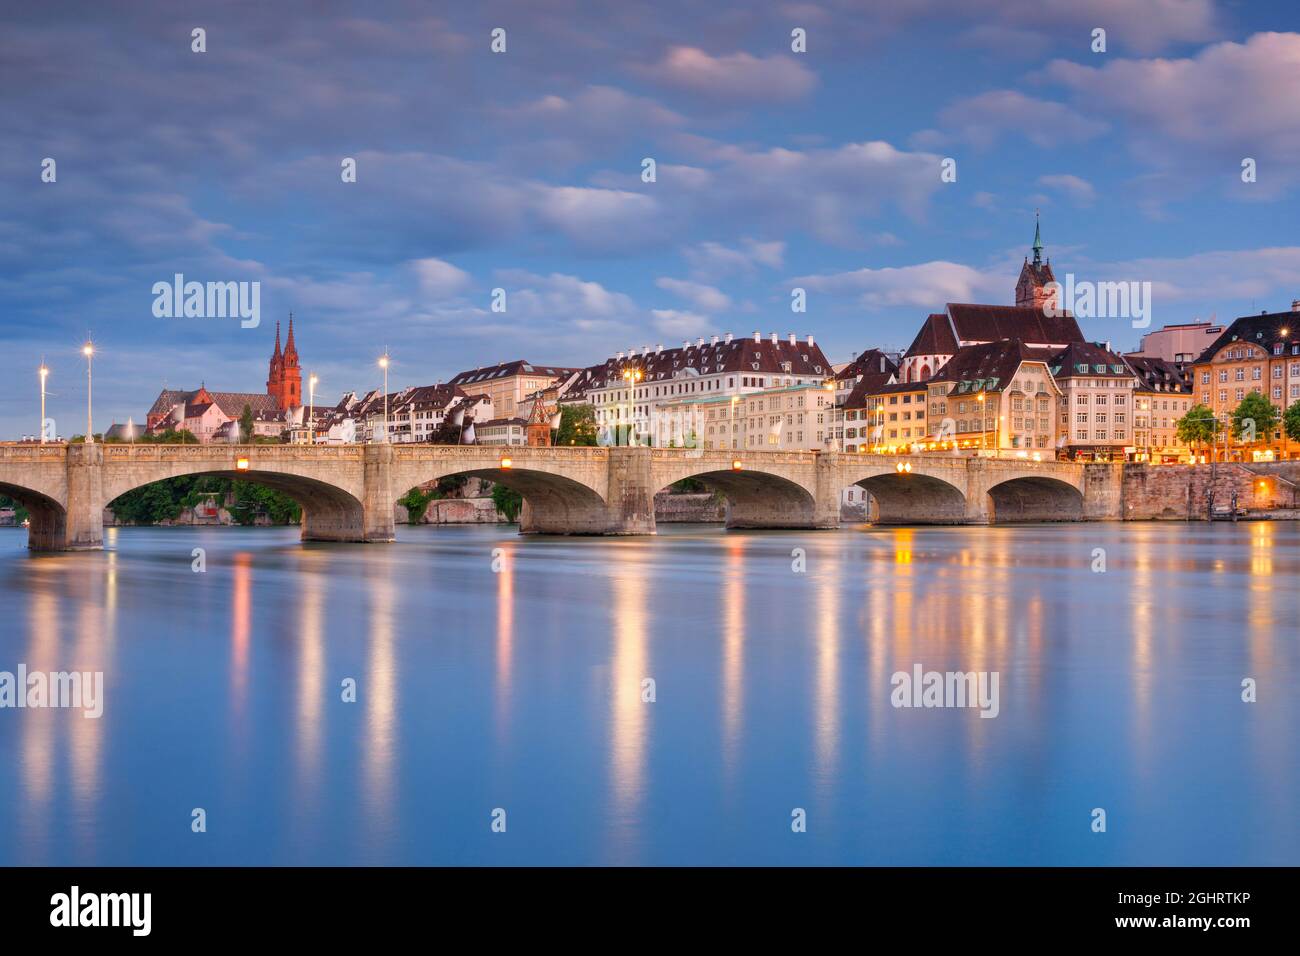 View of the old town of Basel illuminated at night with the Basel Cathedral, St. Martin's Church, the Mittlere Bridge and the Rhine River Stock Photo